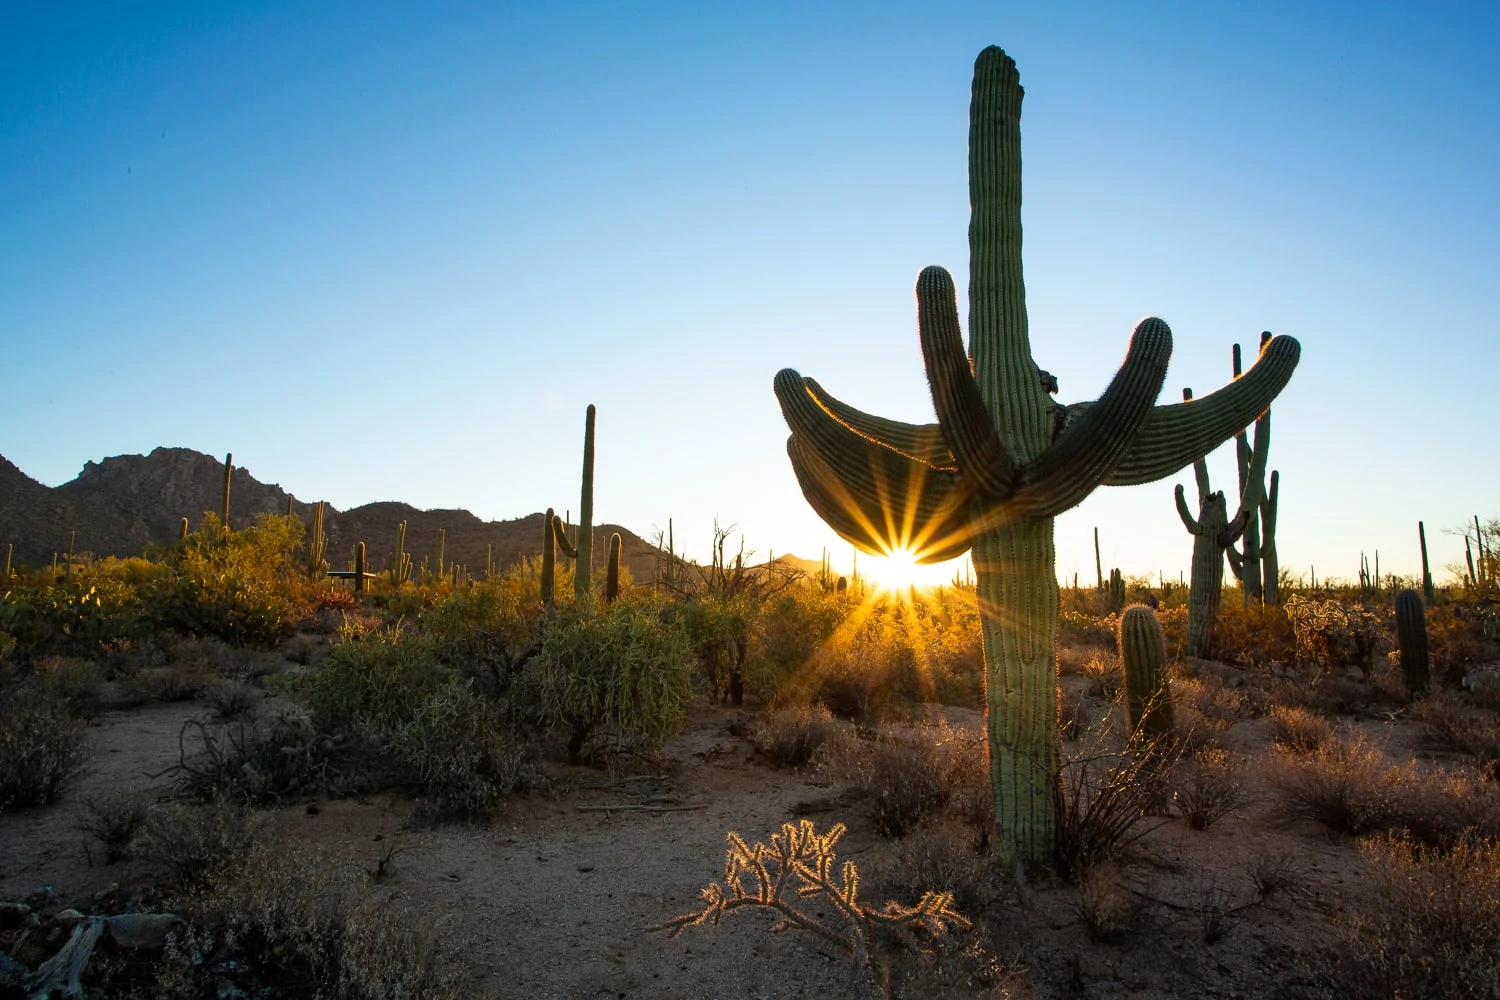 Sunrise in Saguaro National Park's west district with the sun twinkling behind a tall Saguaro cactus.